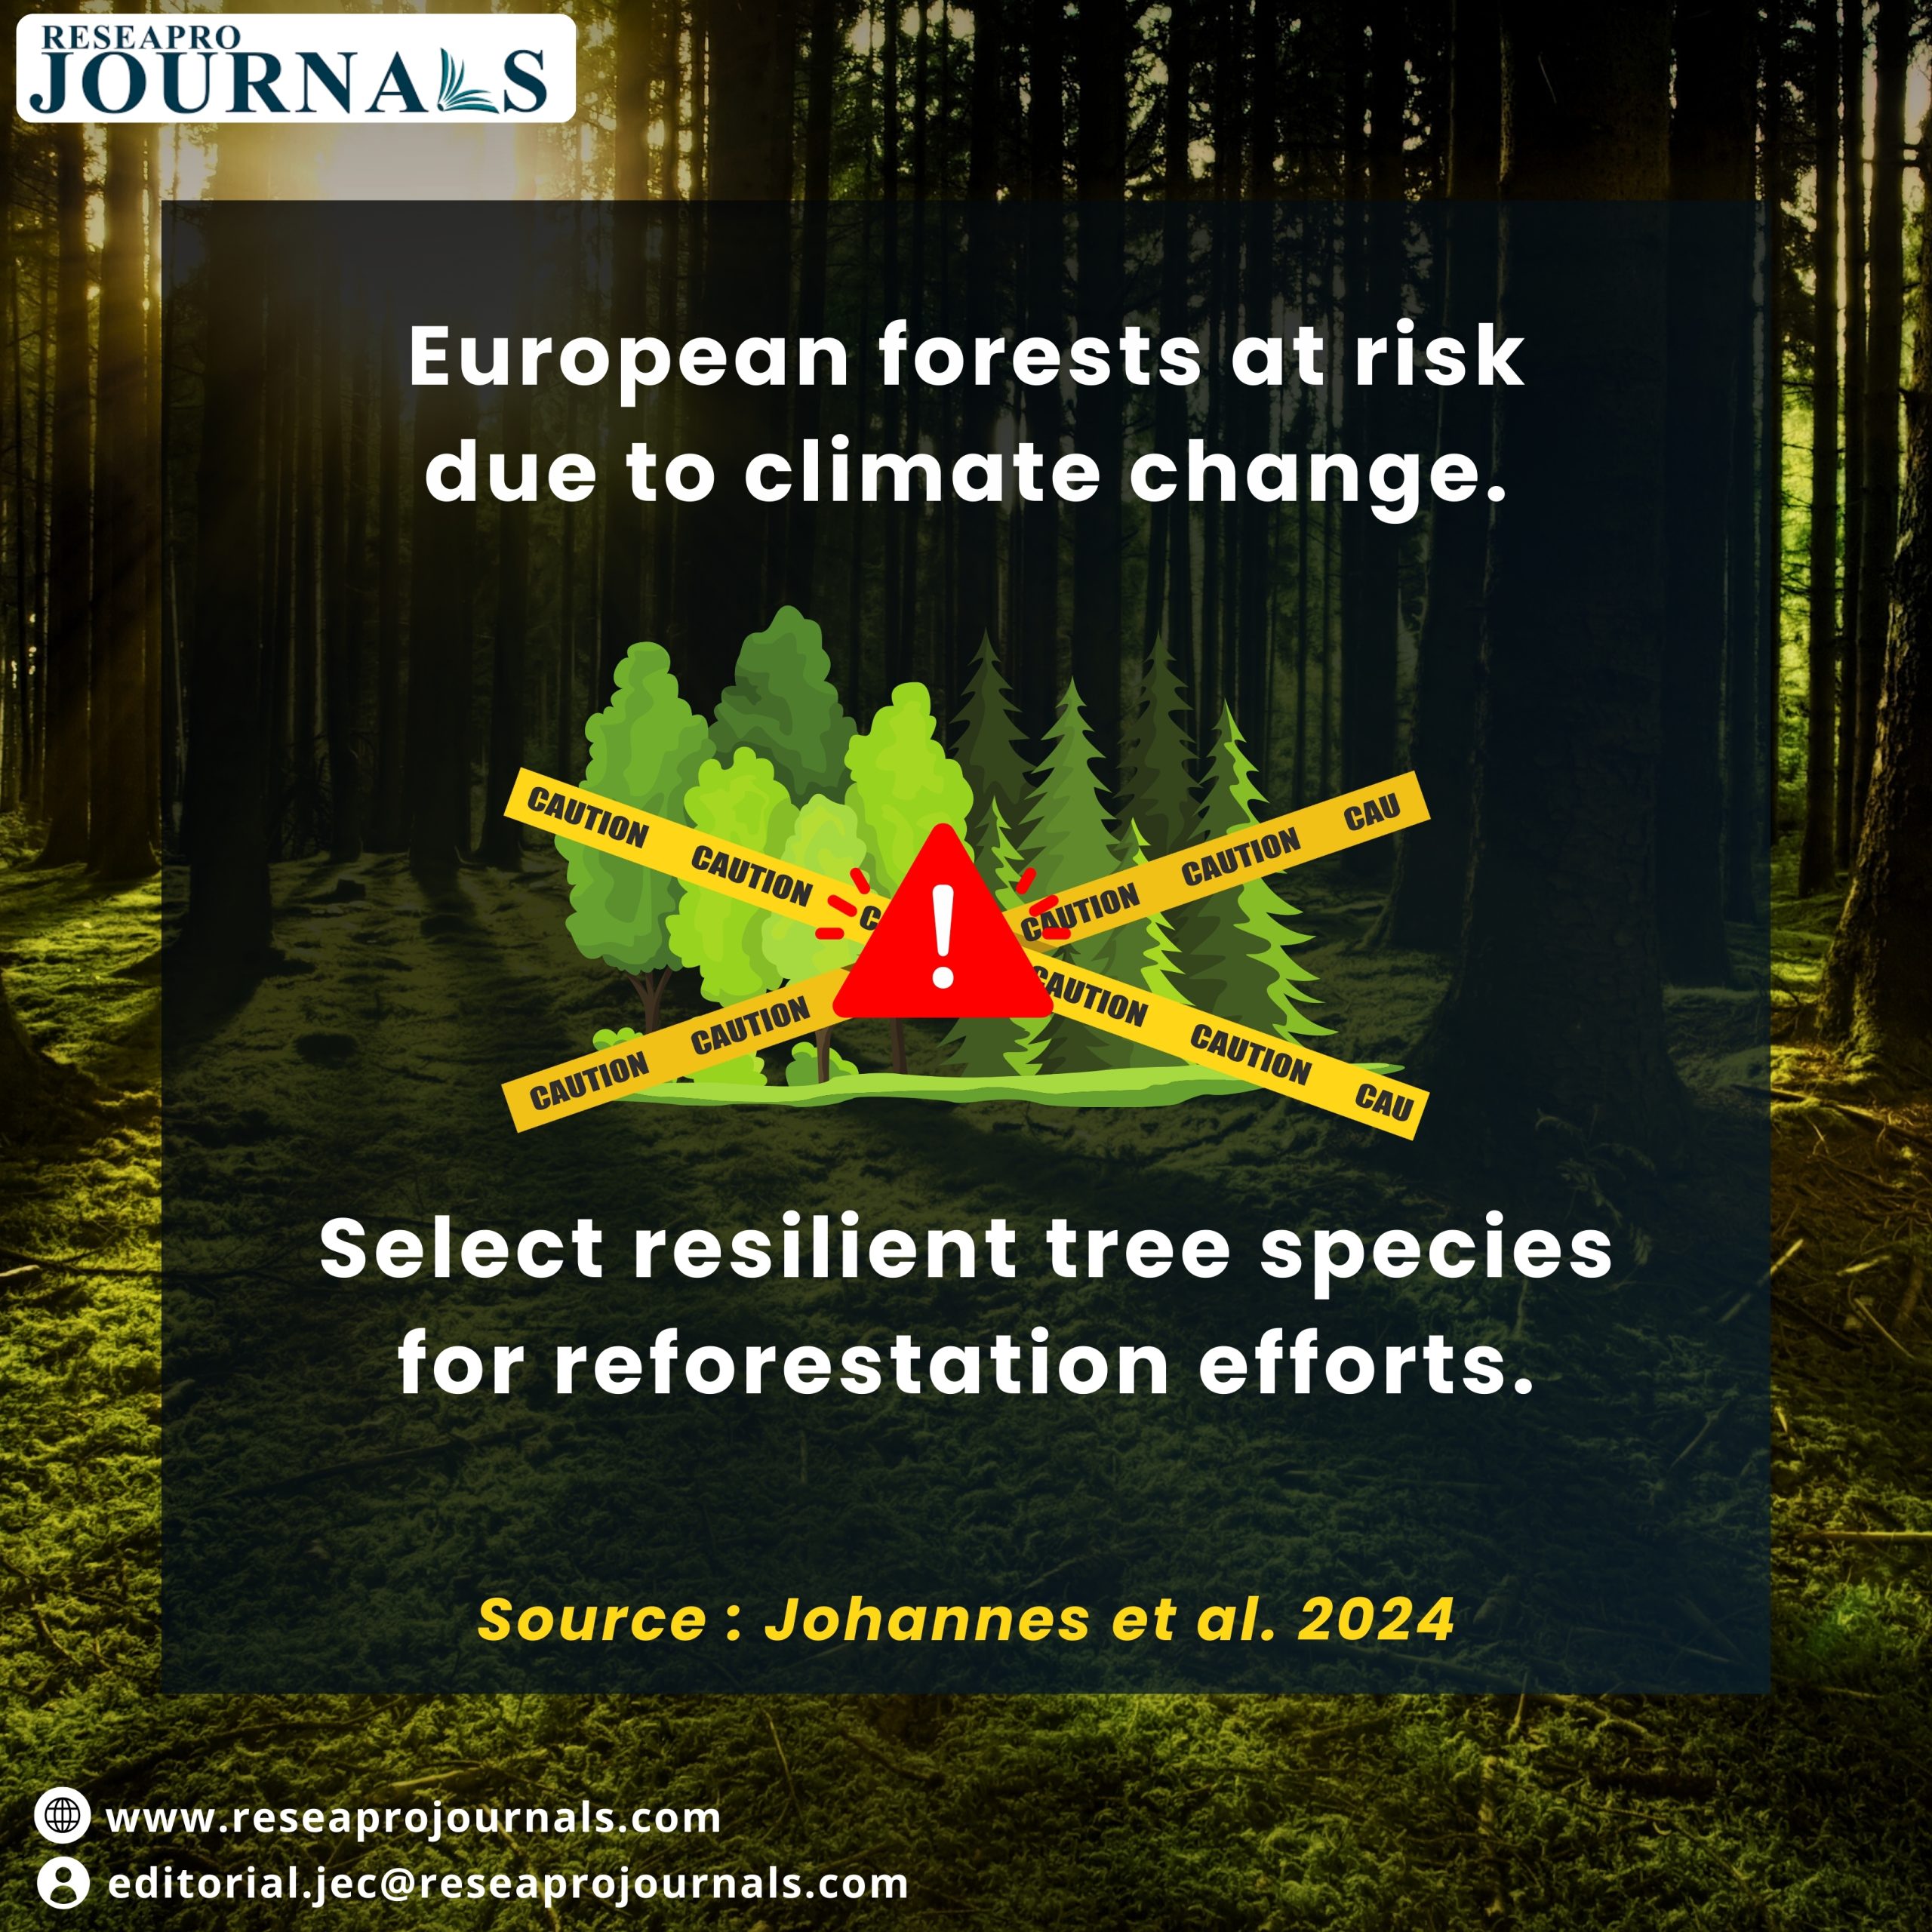 Future-Proofing Forestry: Study Reveals Limited Tree Species Can Withstand Climate Change in Europe